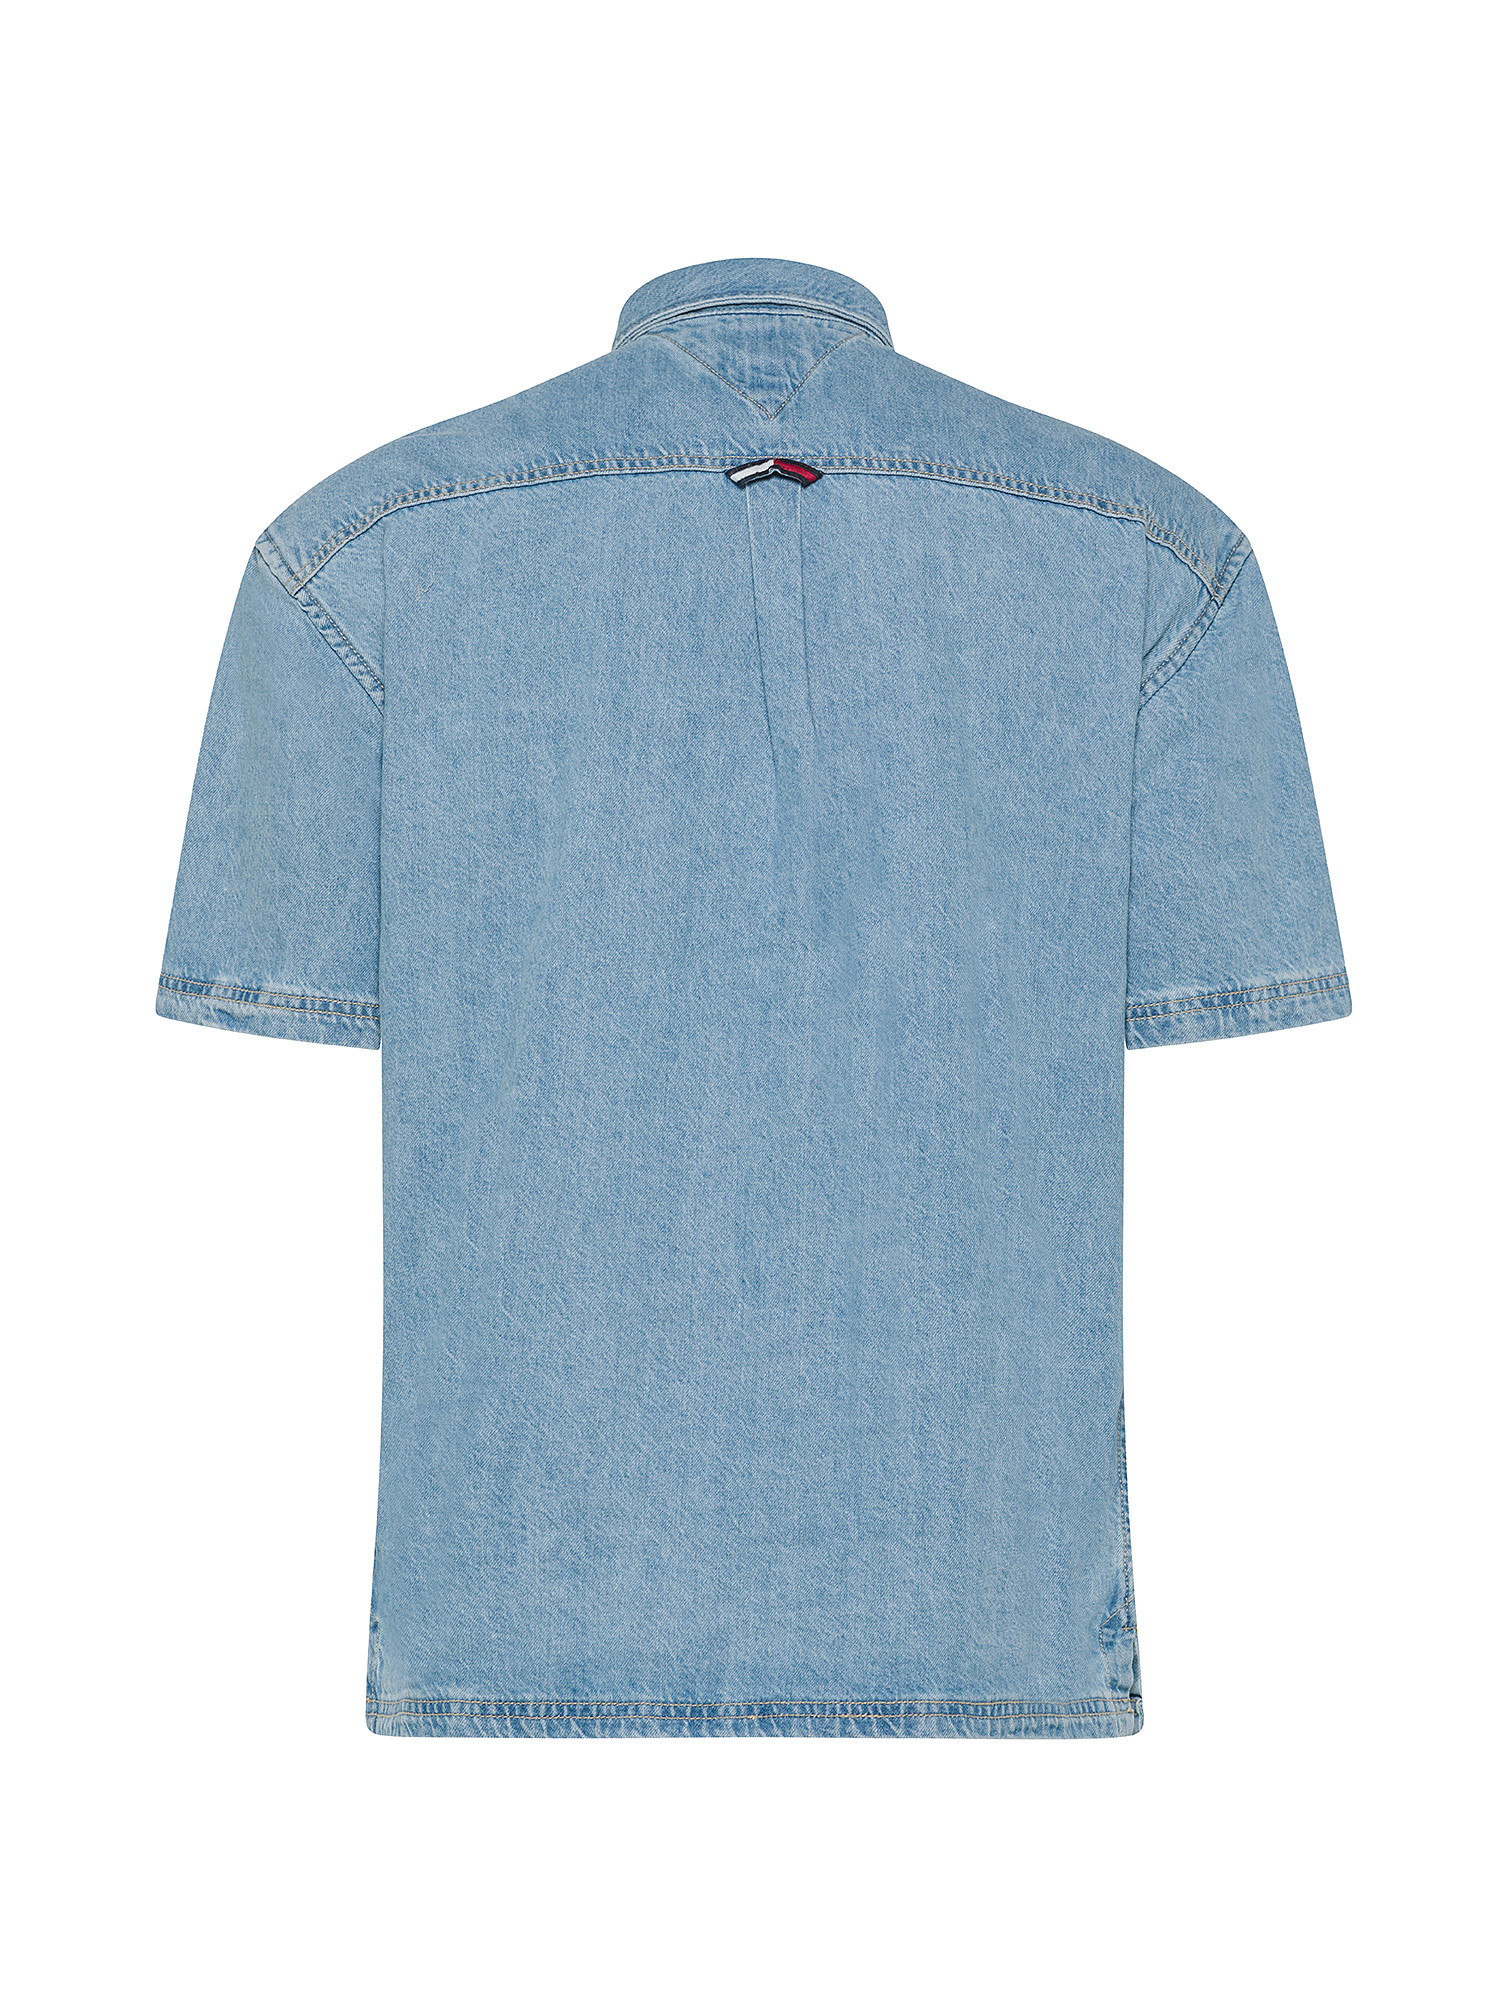 Tommy Jeans - Camicia in cotone con logo, Denim, large image number 1